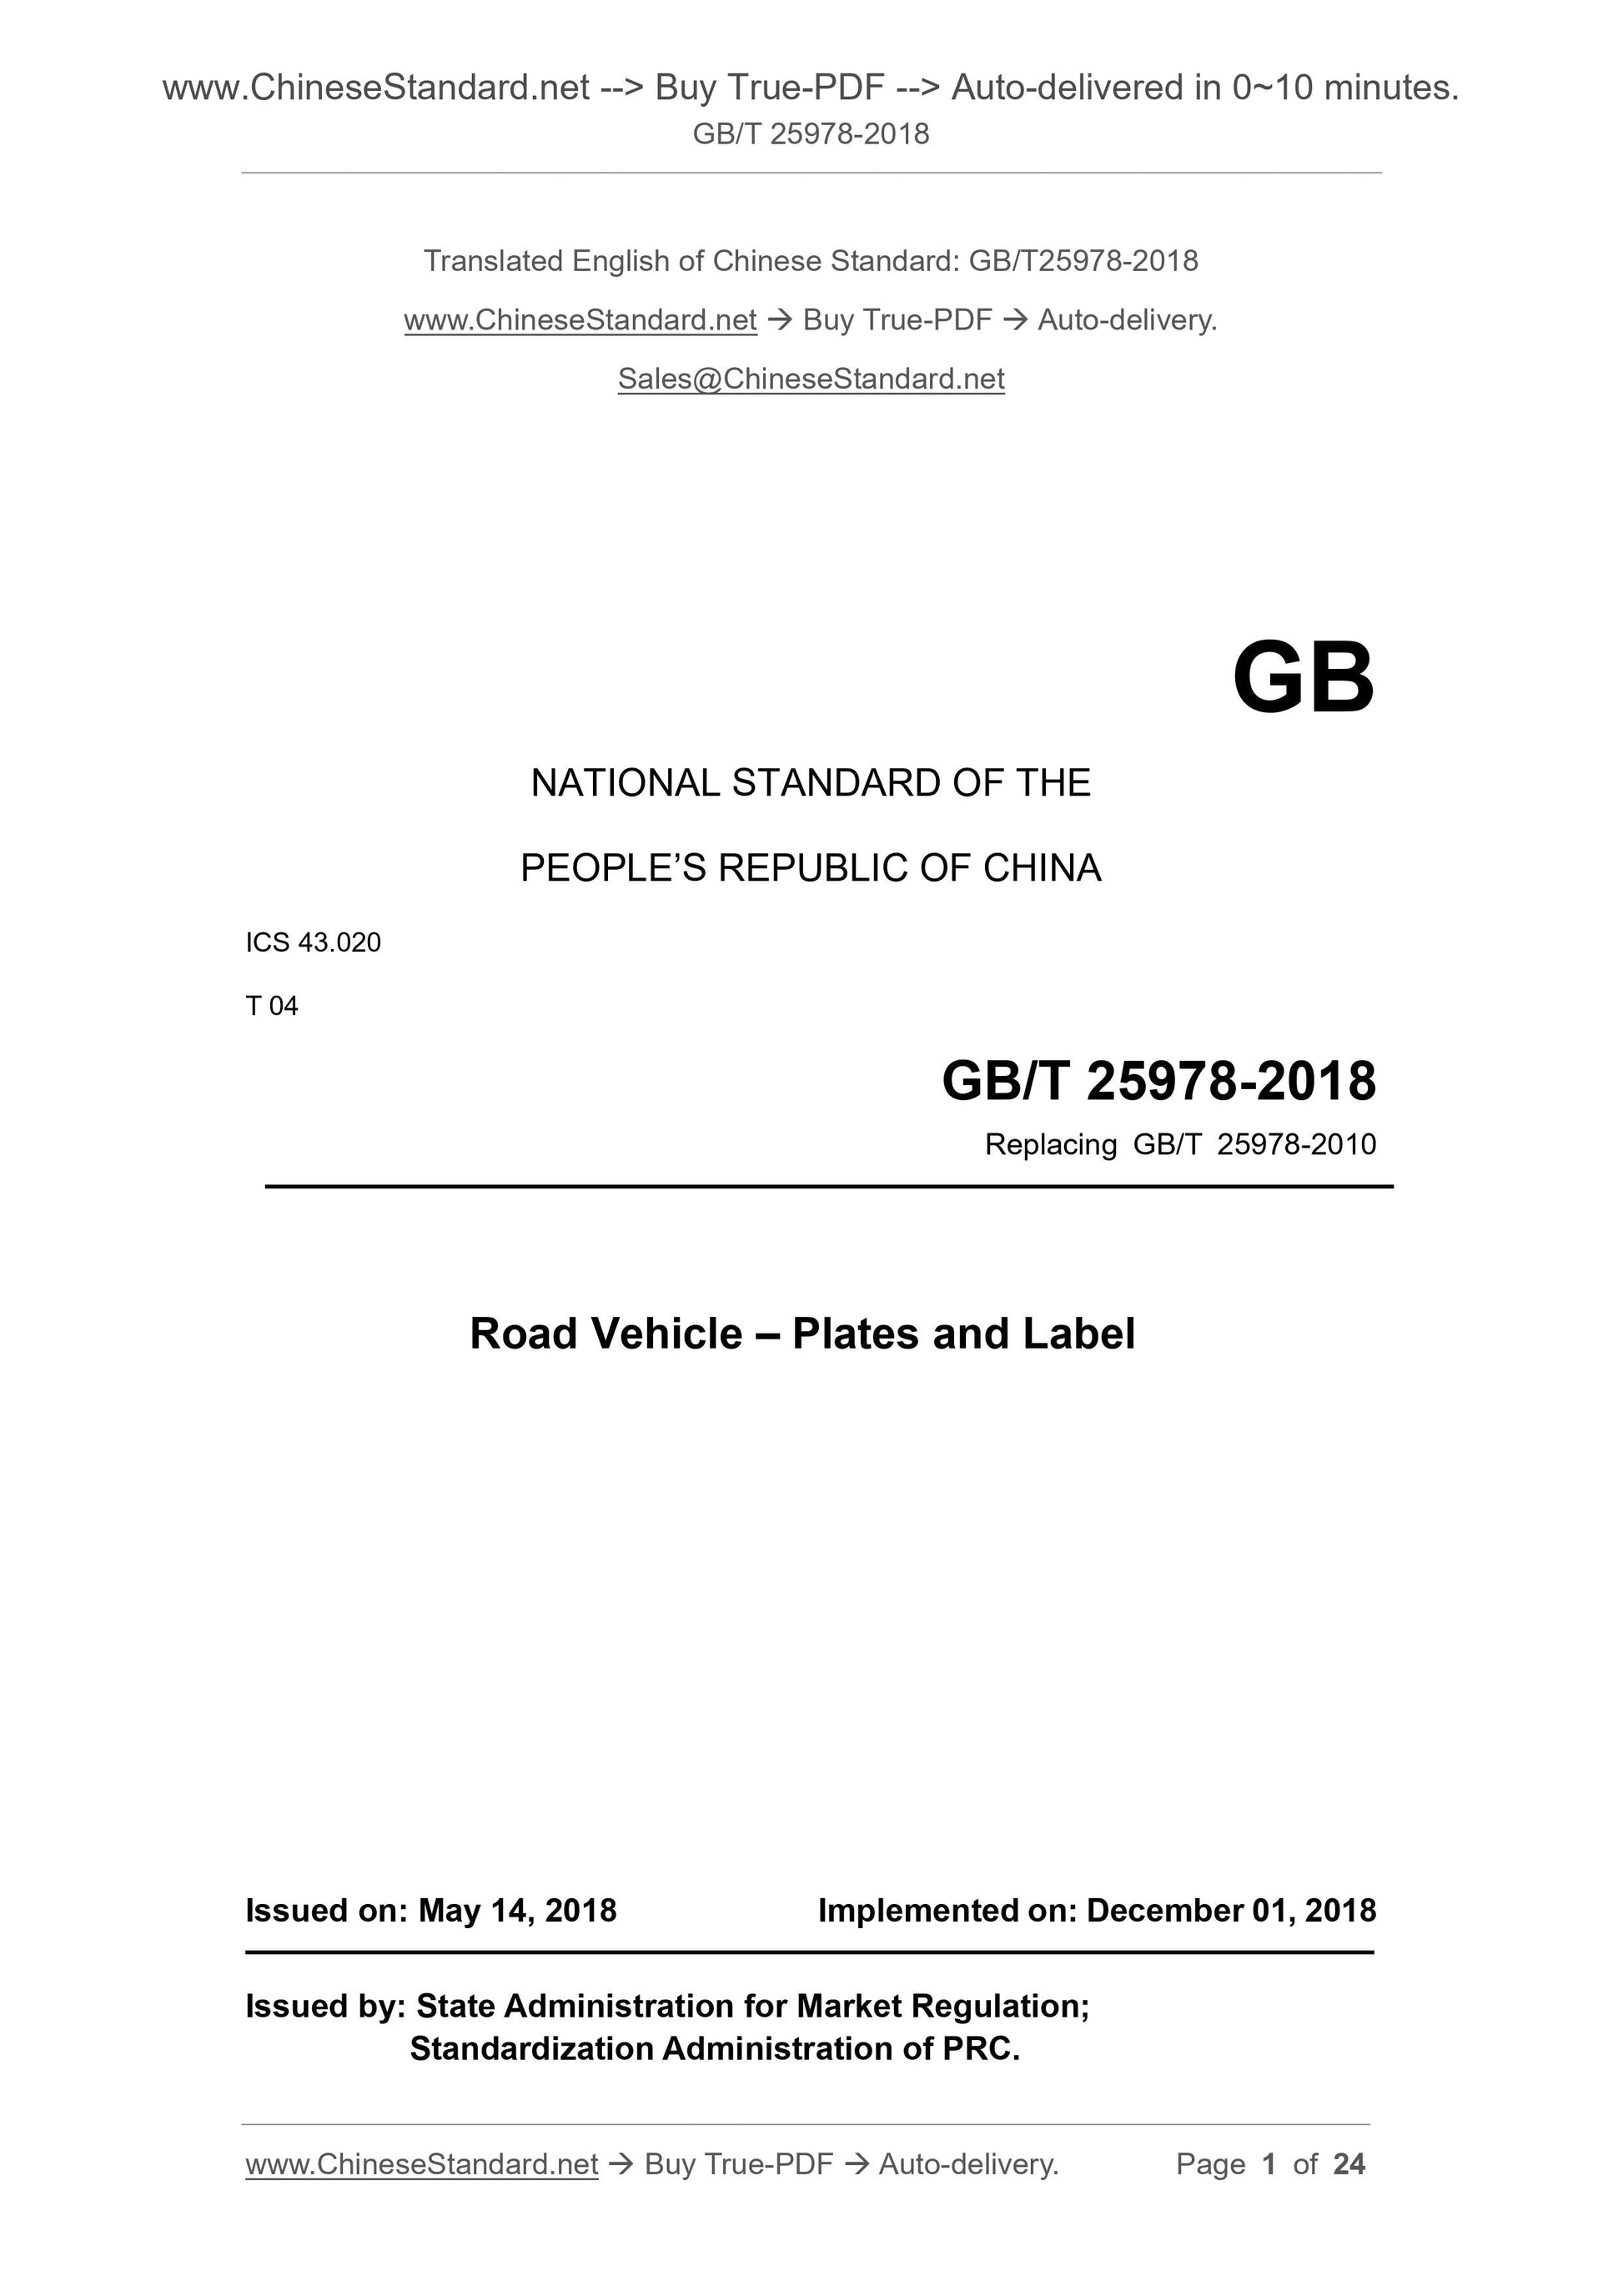 GB/T 25978-2018 Page 1